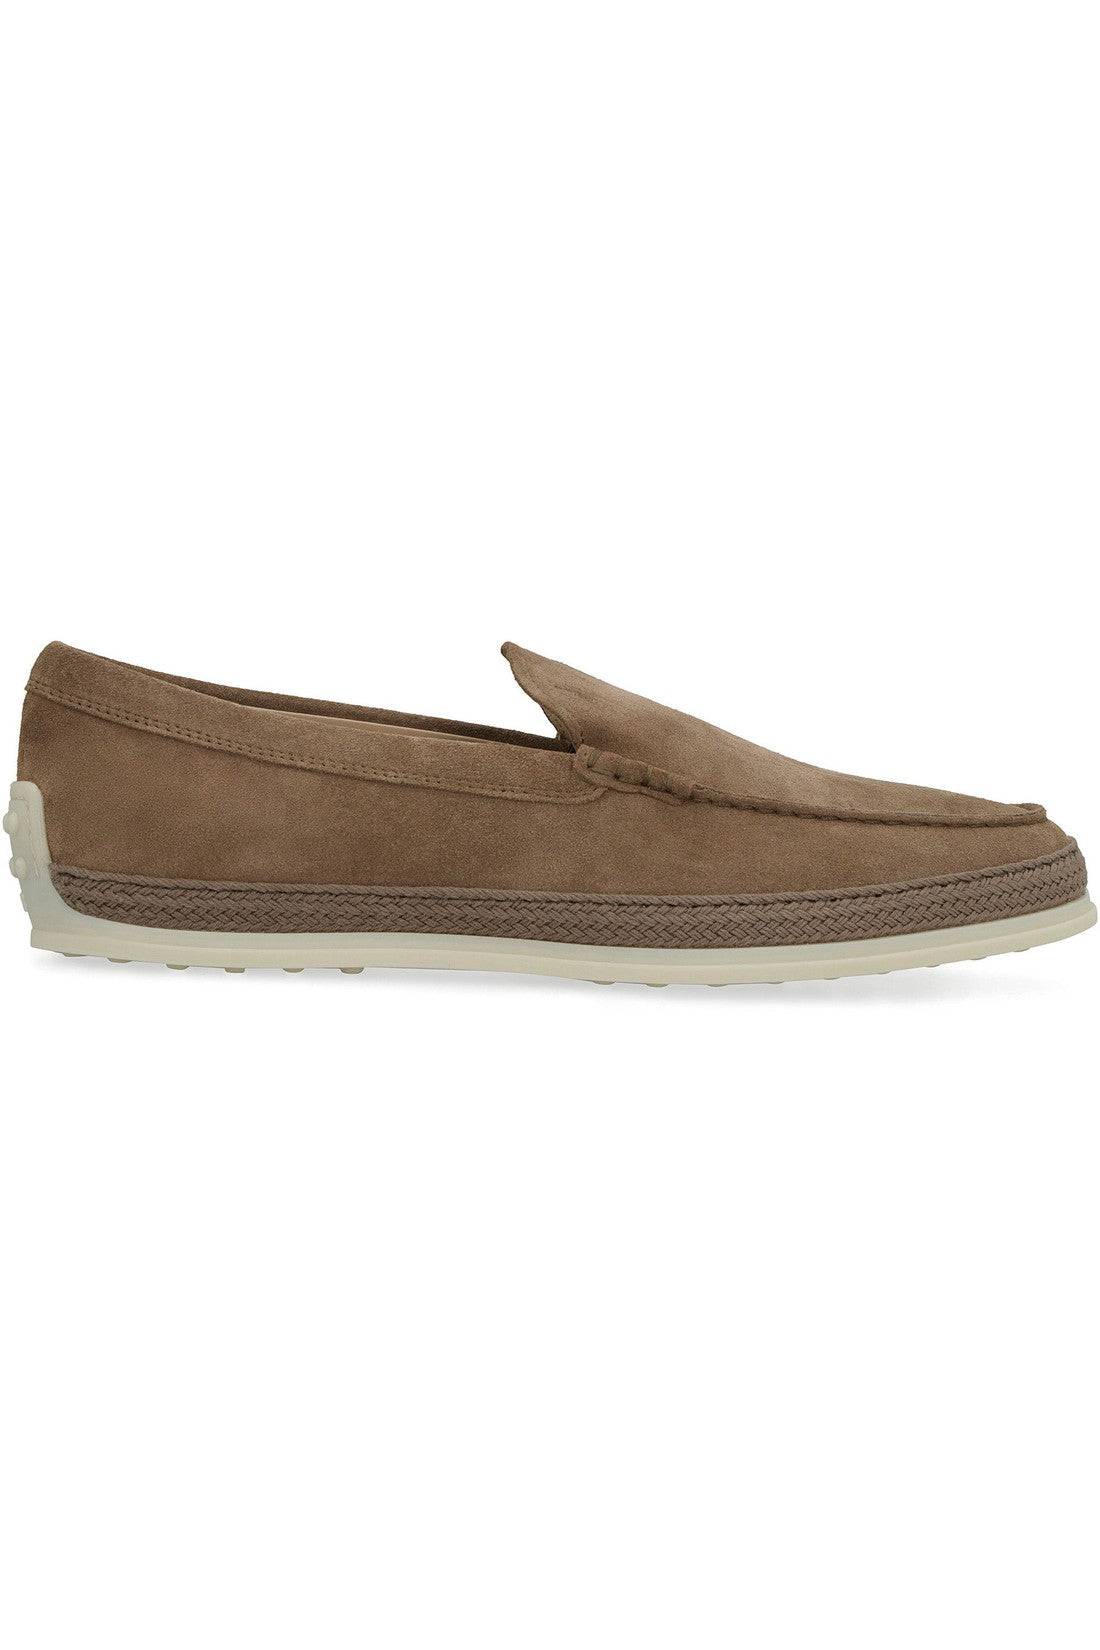 Tod's-OUTLET-SALE-Suede slip-on-ARCHIVIST